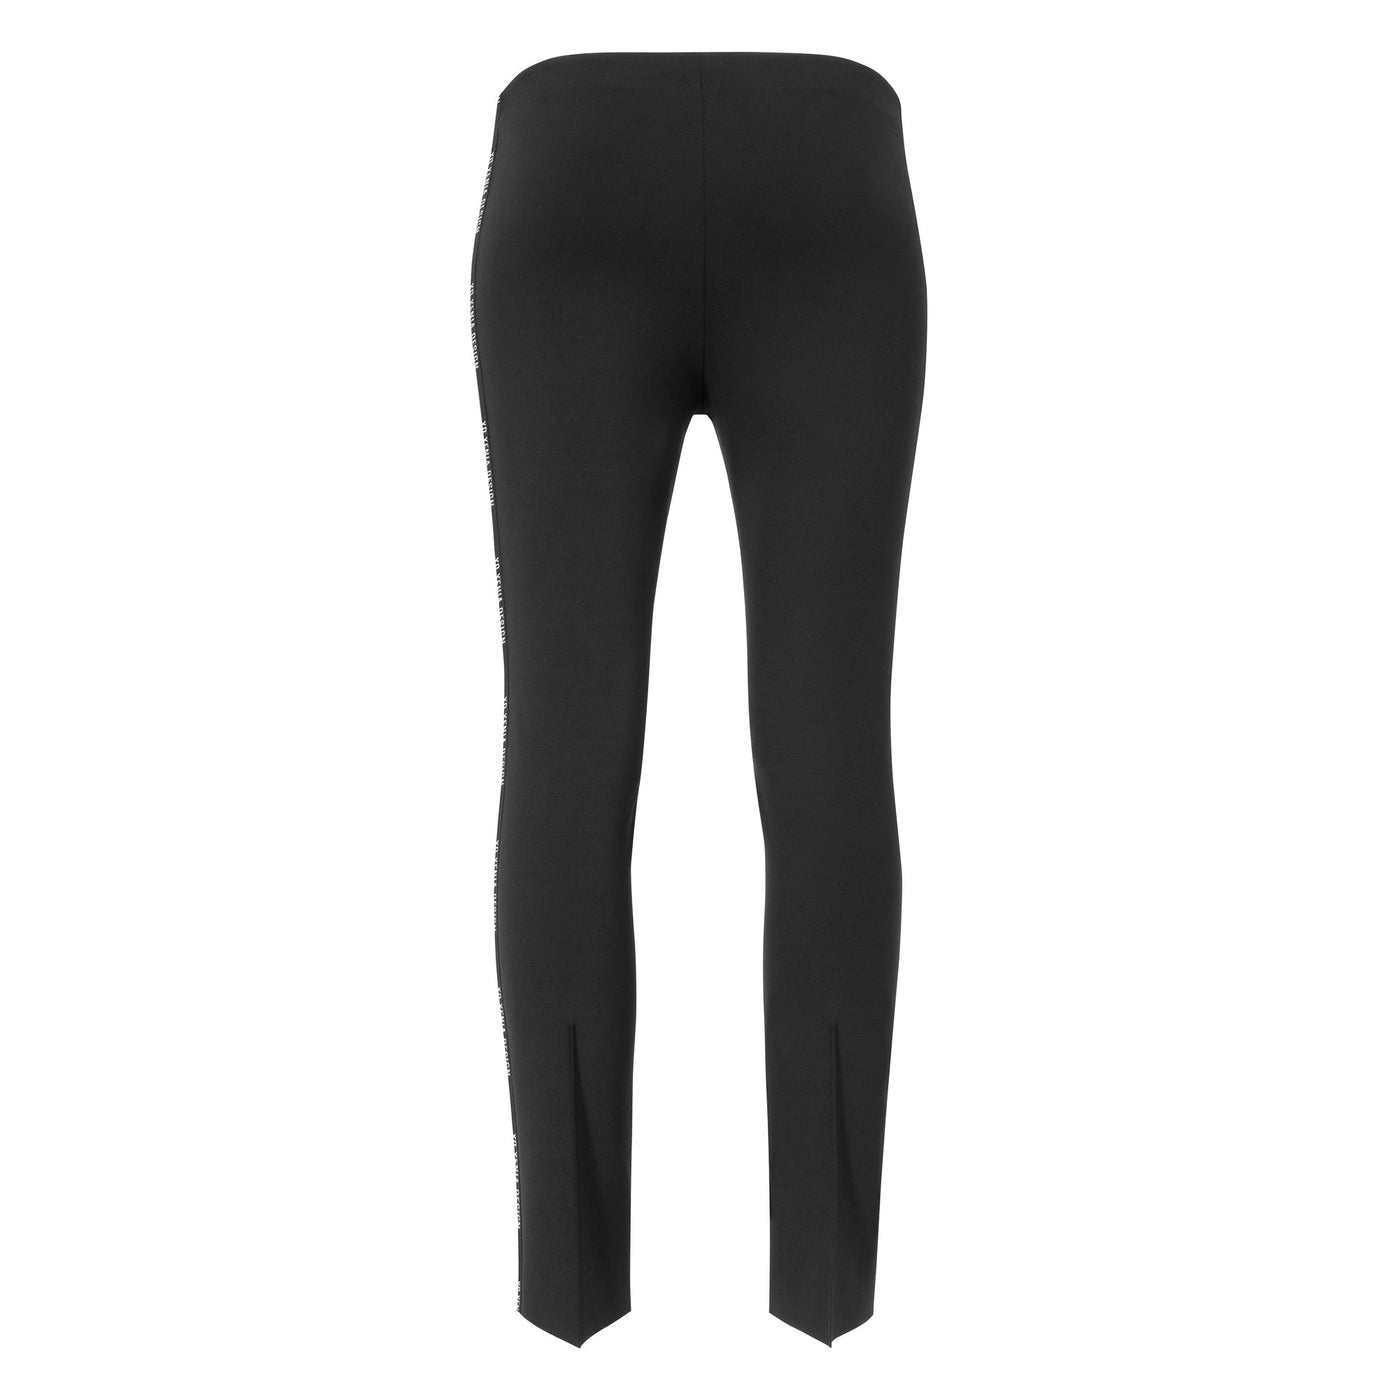 Trousers "LUME"